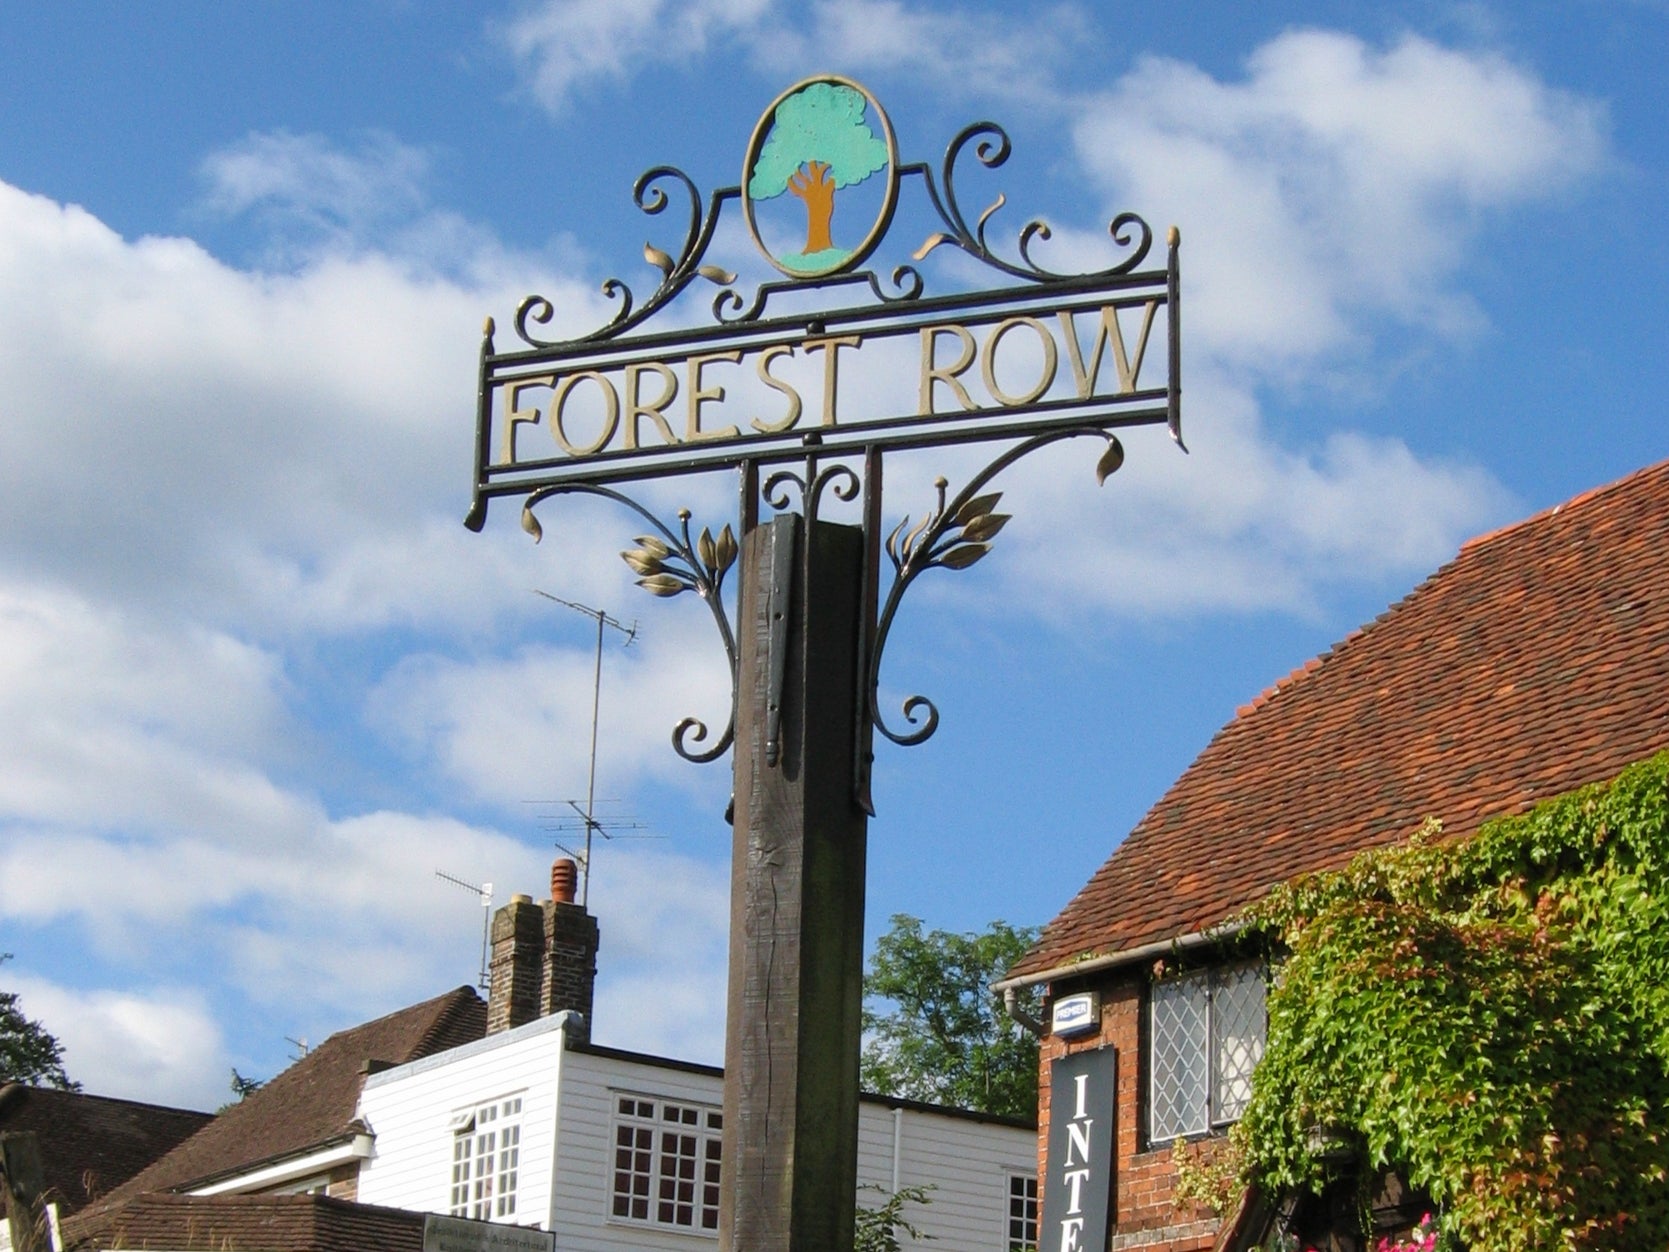 Forest Row, or ‘Frow’, to those in the know